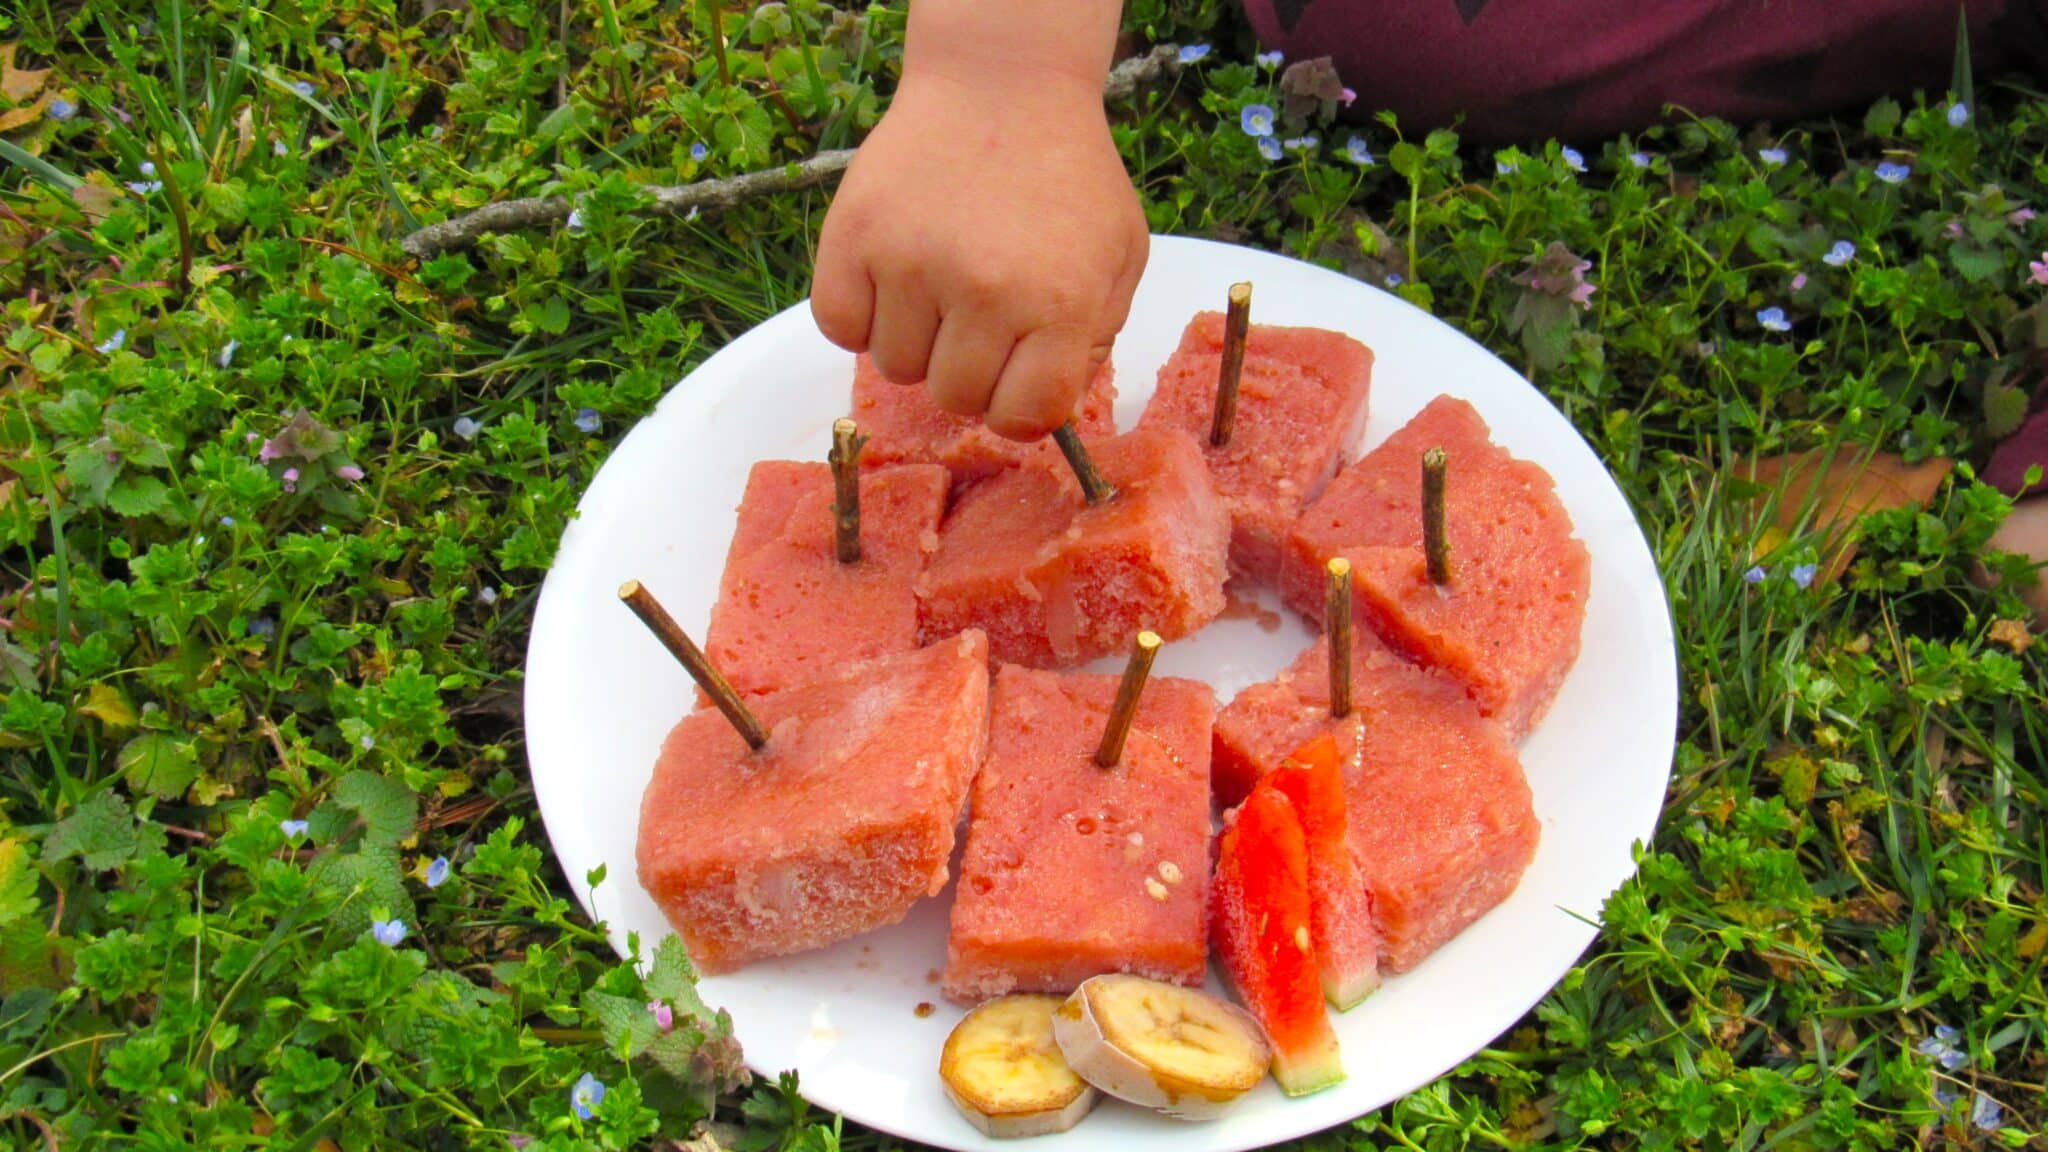 Watermelon banana popsicles are served on a white plate, and a hand picks one popsicle.